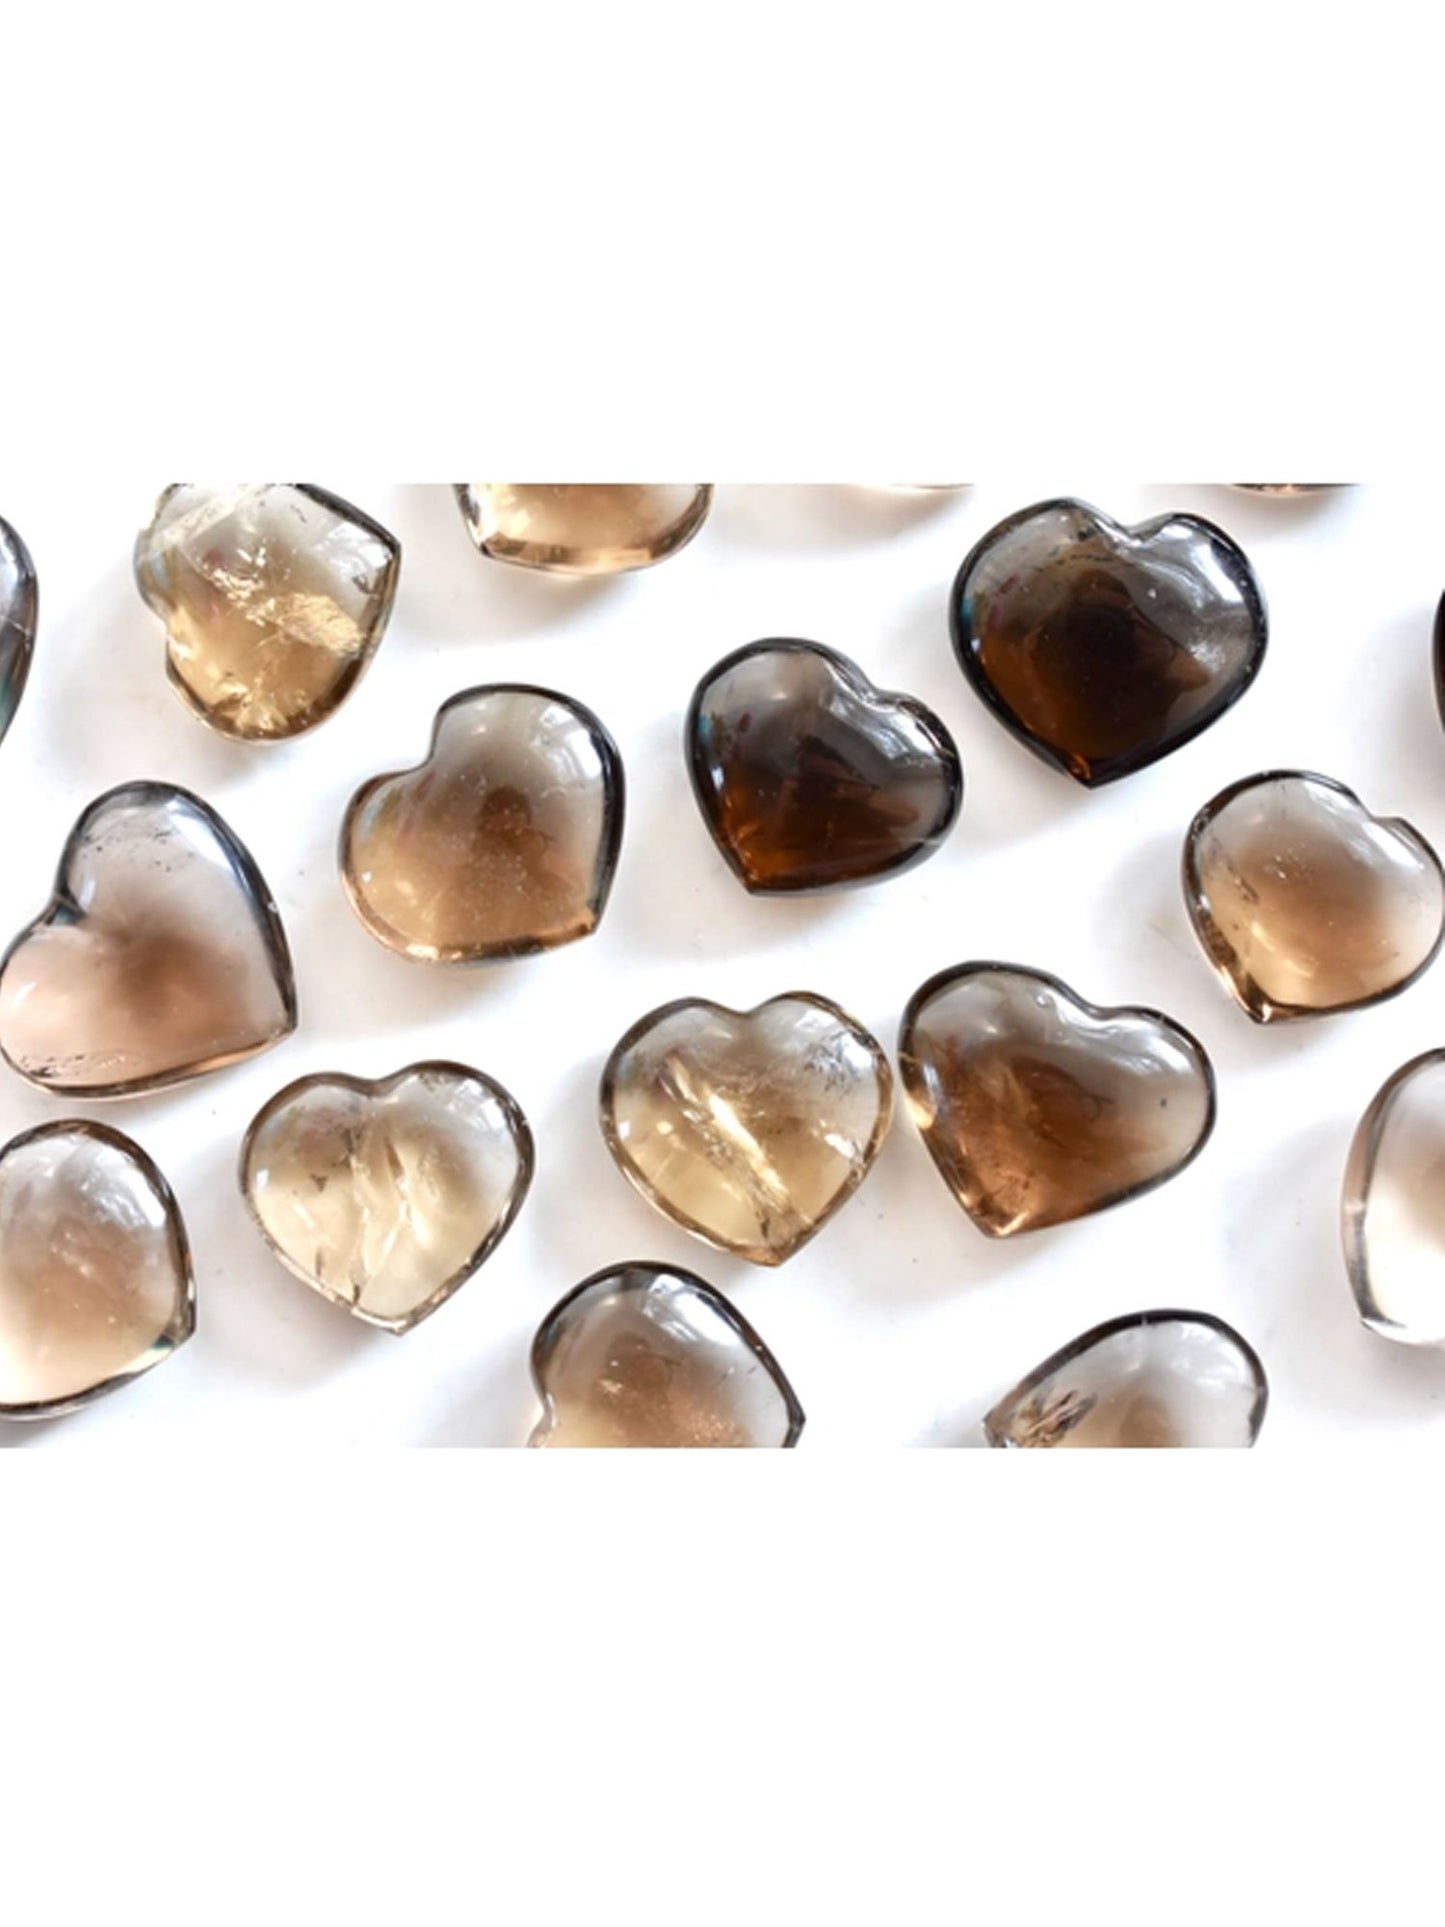 Open Heart Apothecary Smoky Quartz Heart Crystals Gorgeous Natural Mineral